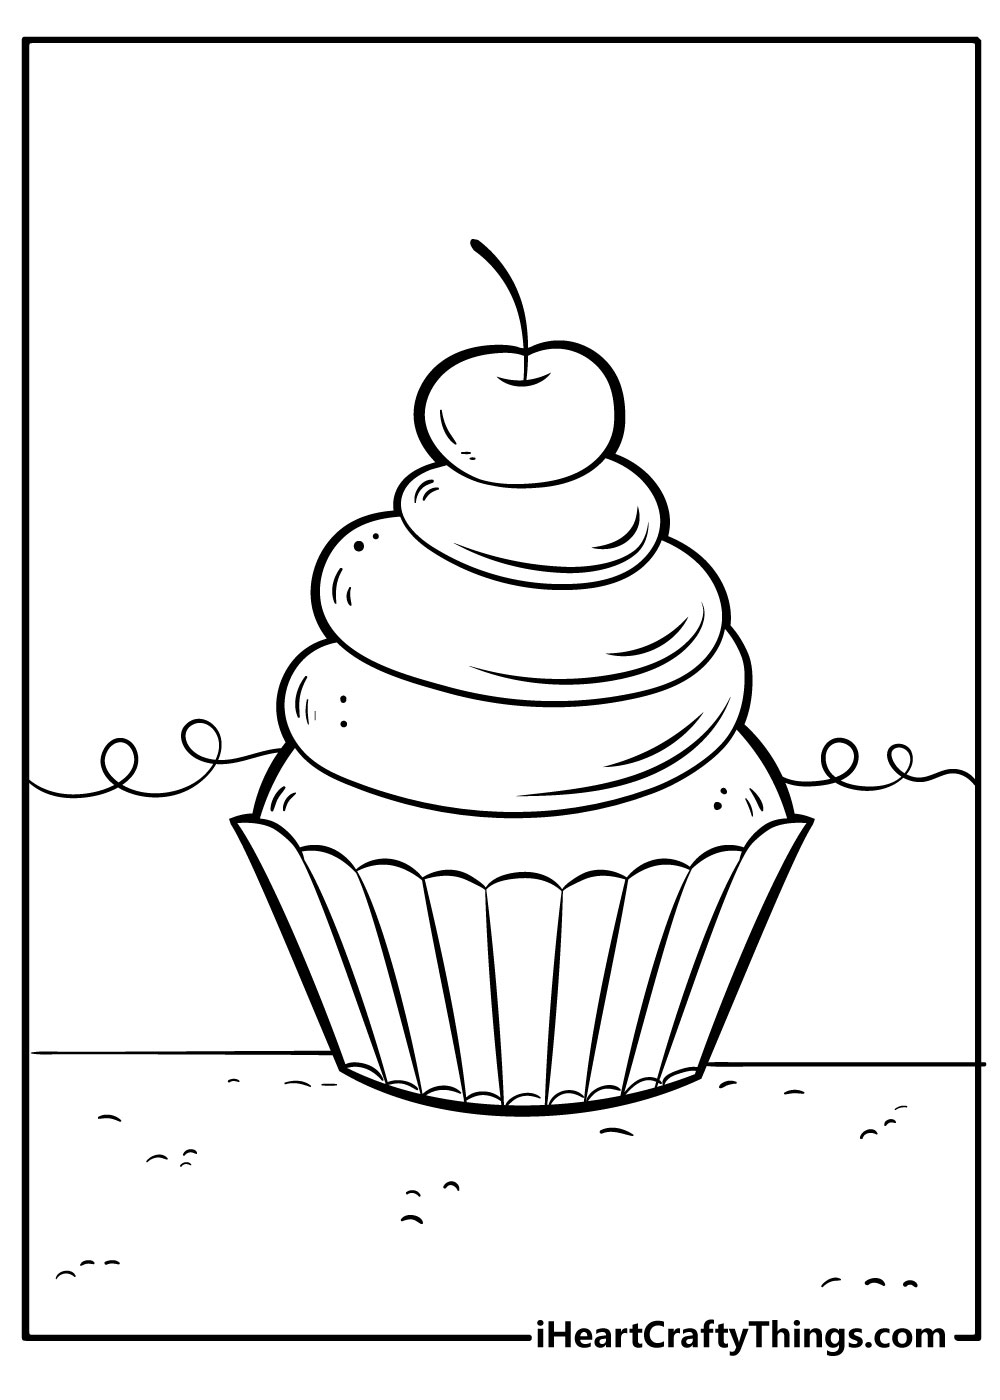 Cupcake Coloring Pages for kids free printable